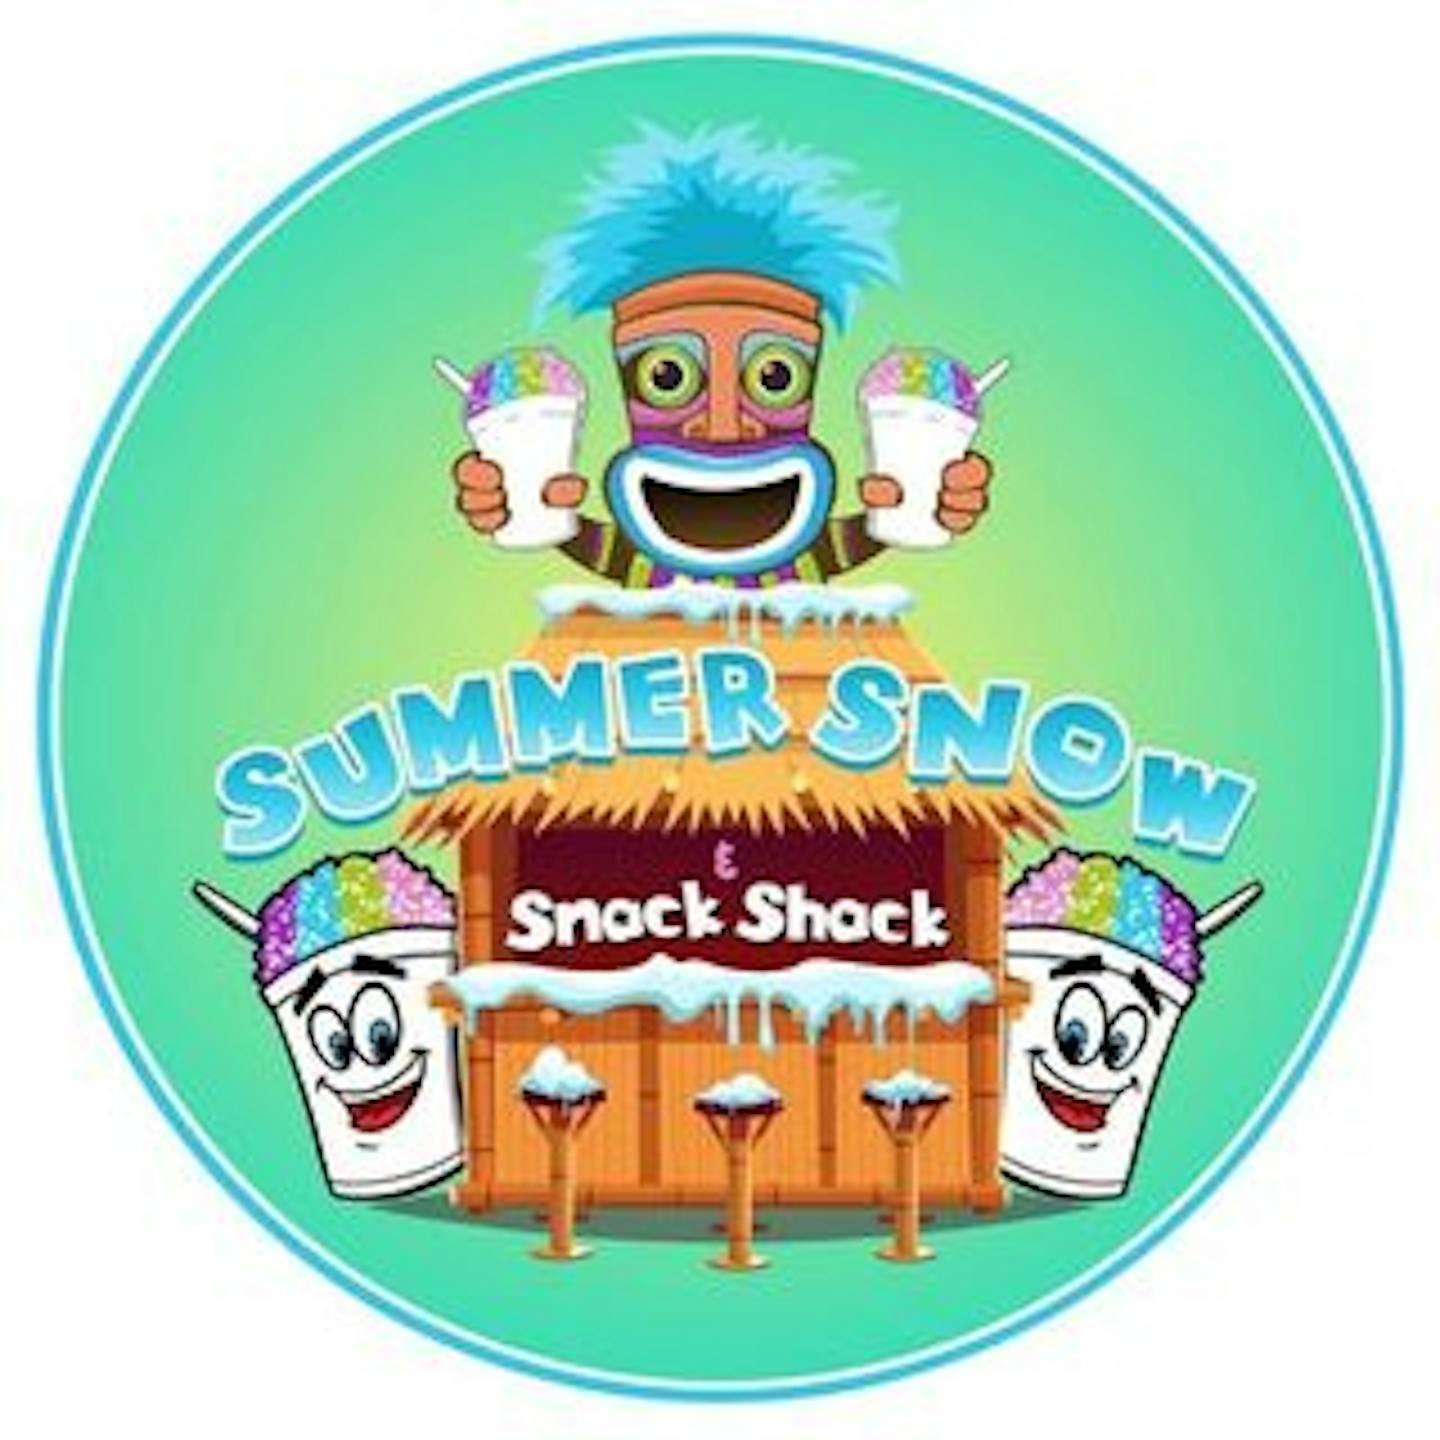 Summersnow and snack shack